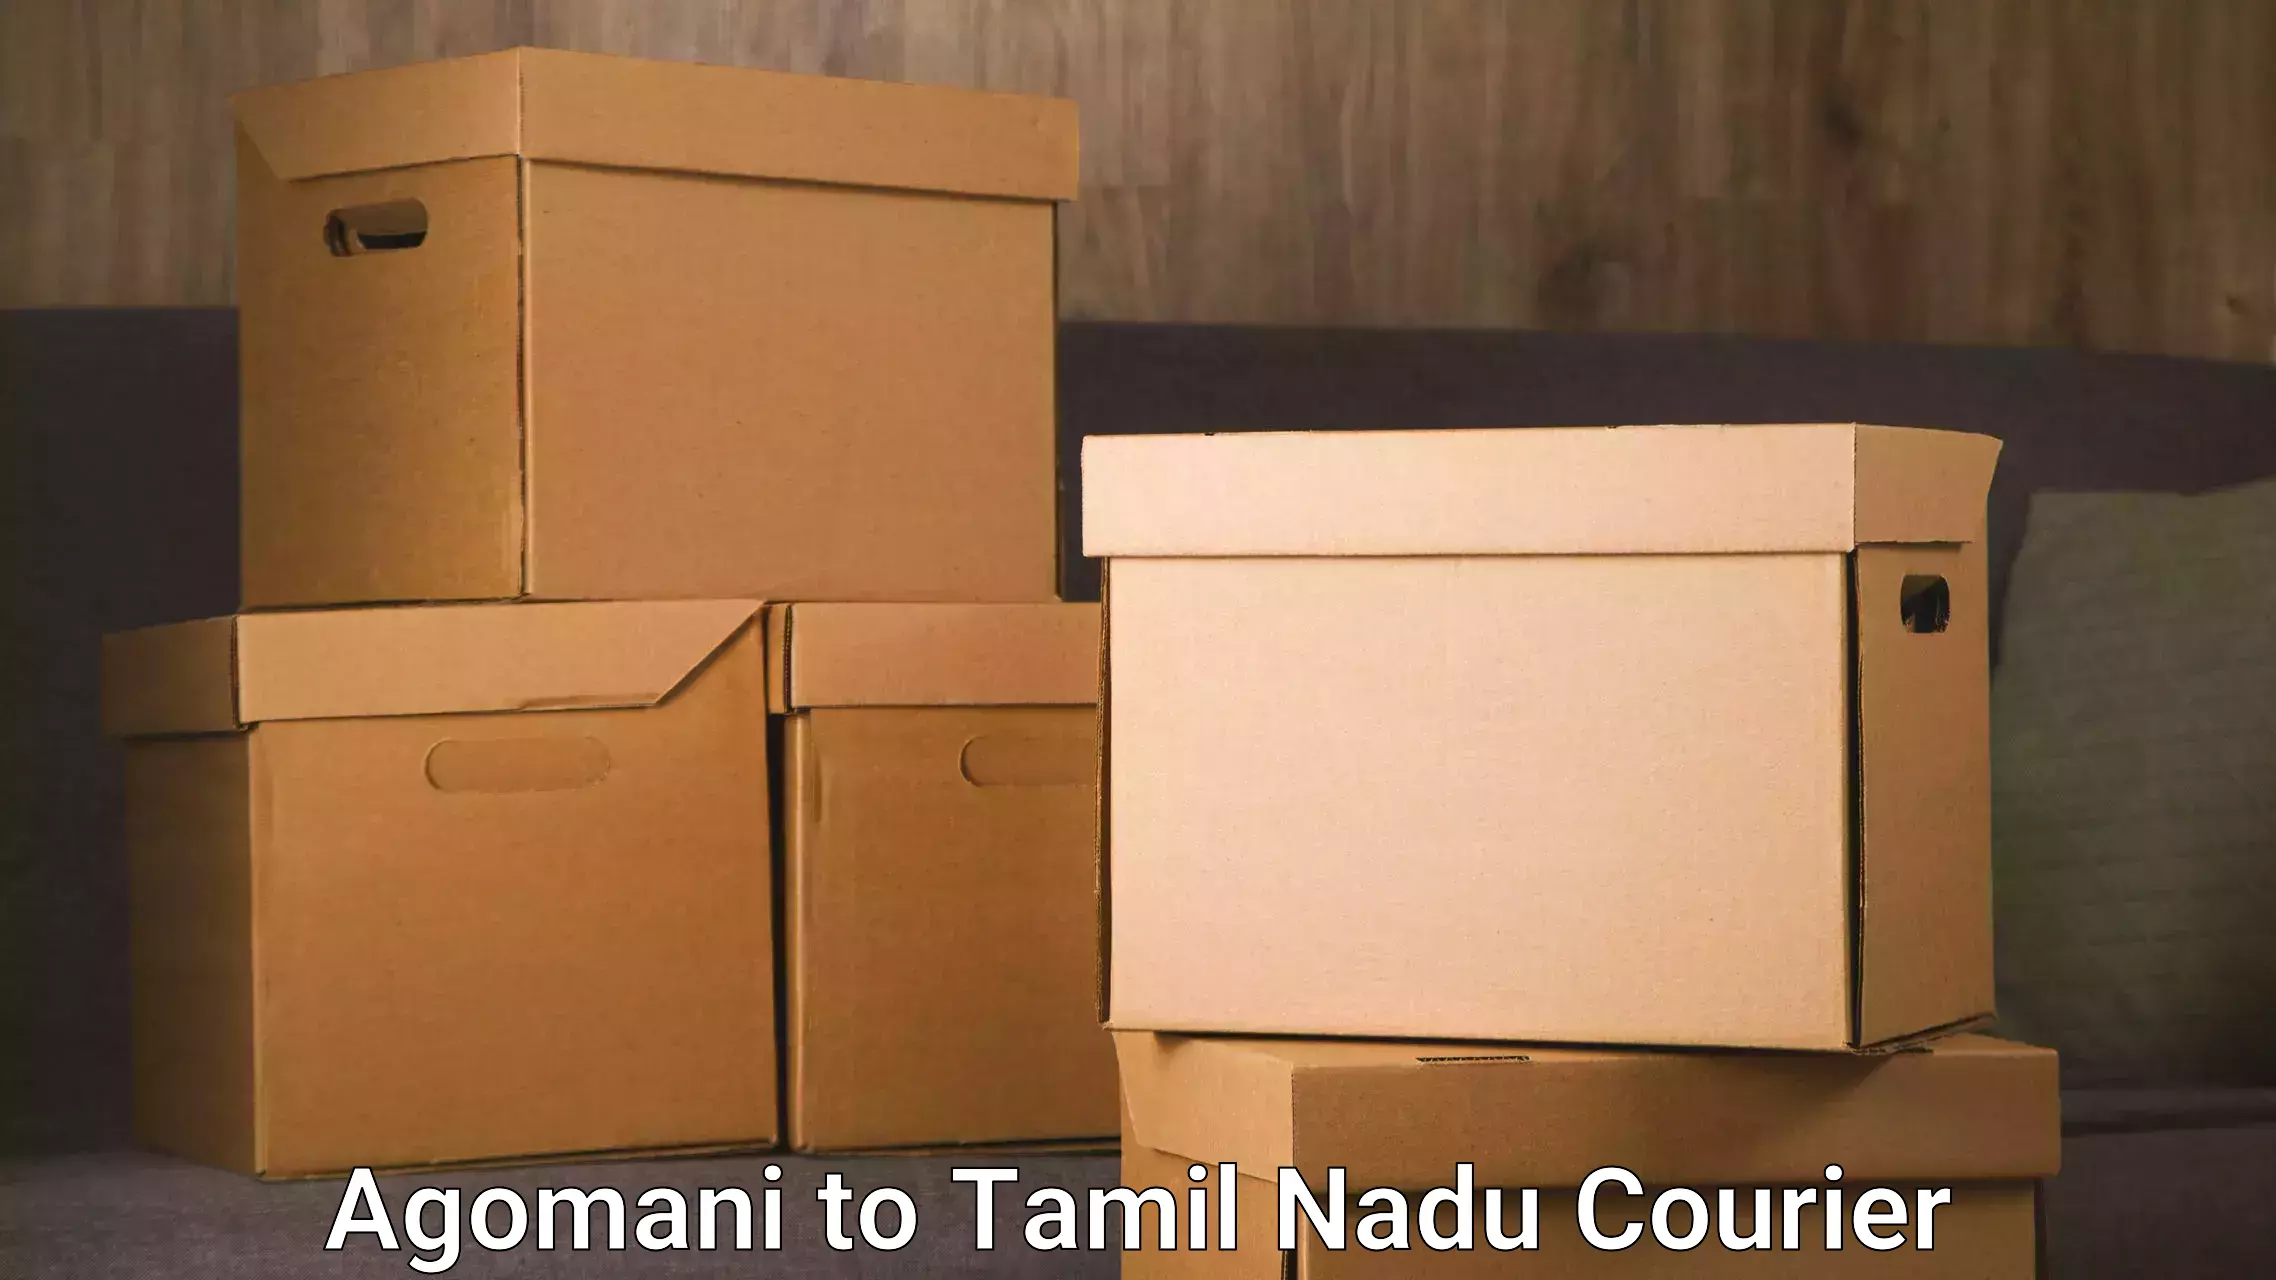 Tailored shipping plans Agomani to Vellore Institute of Technology